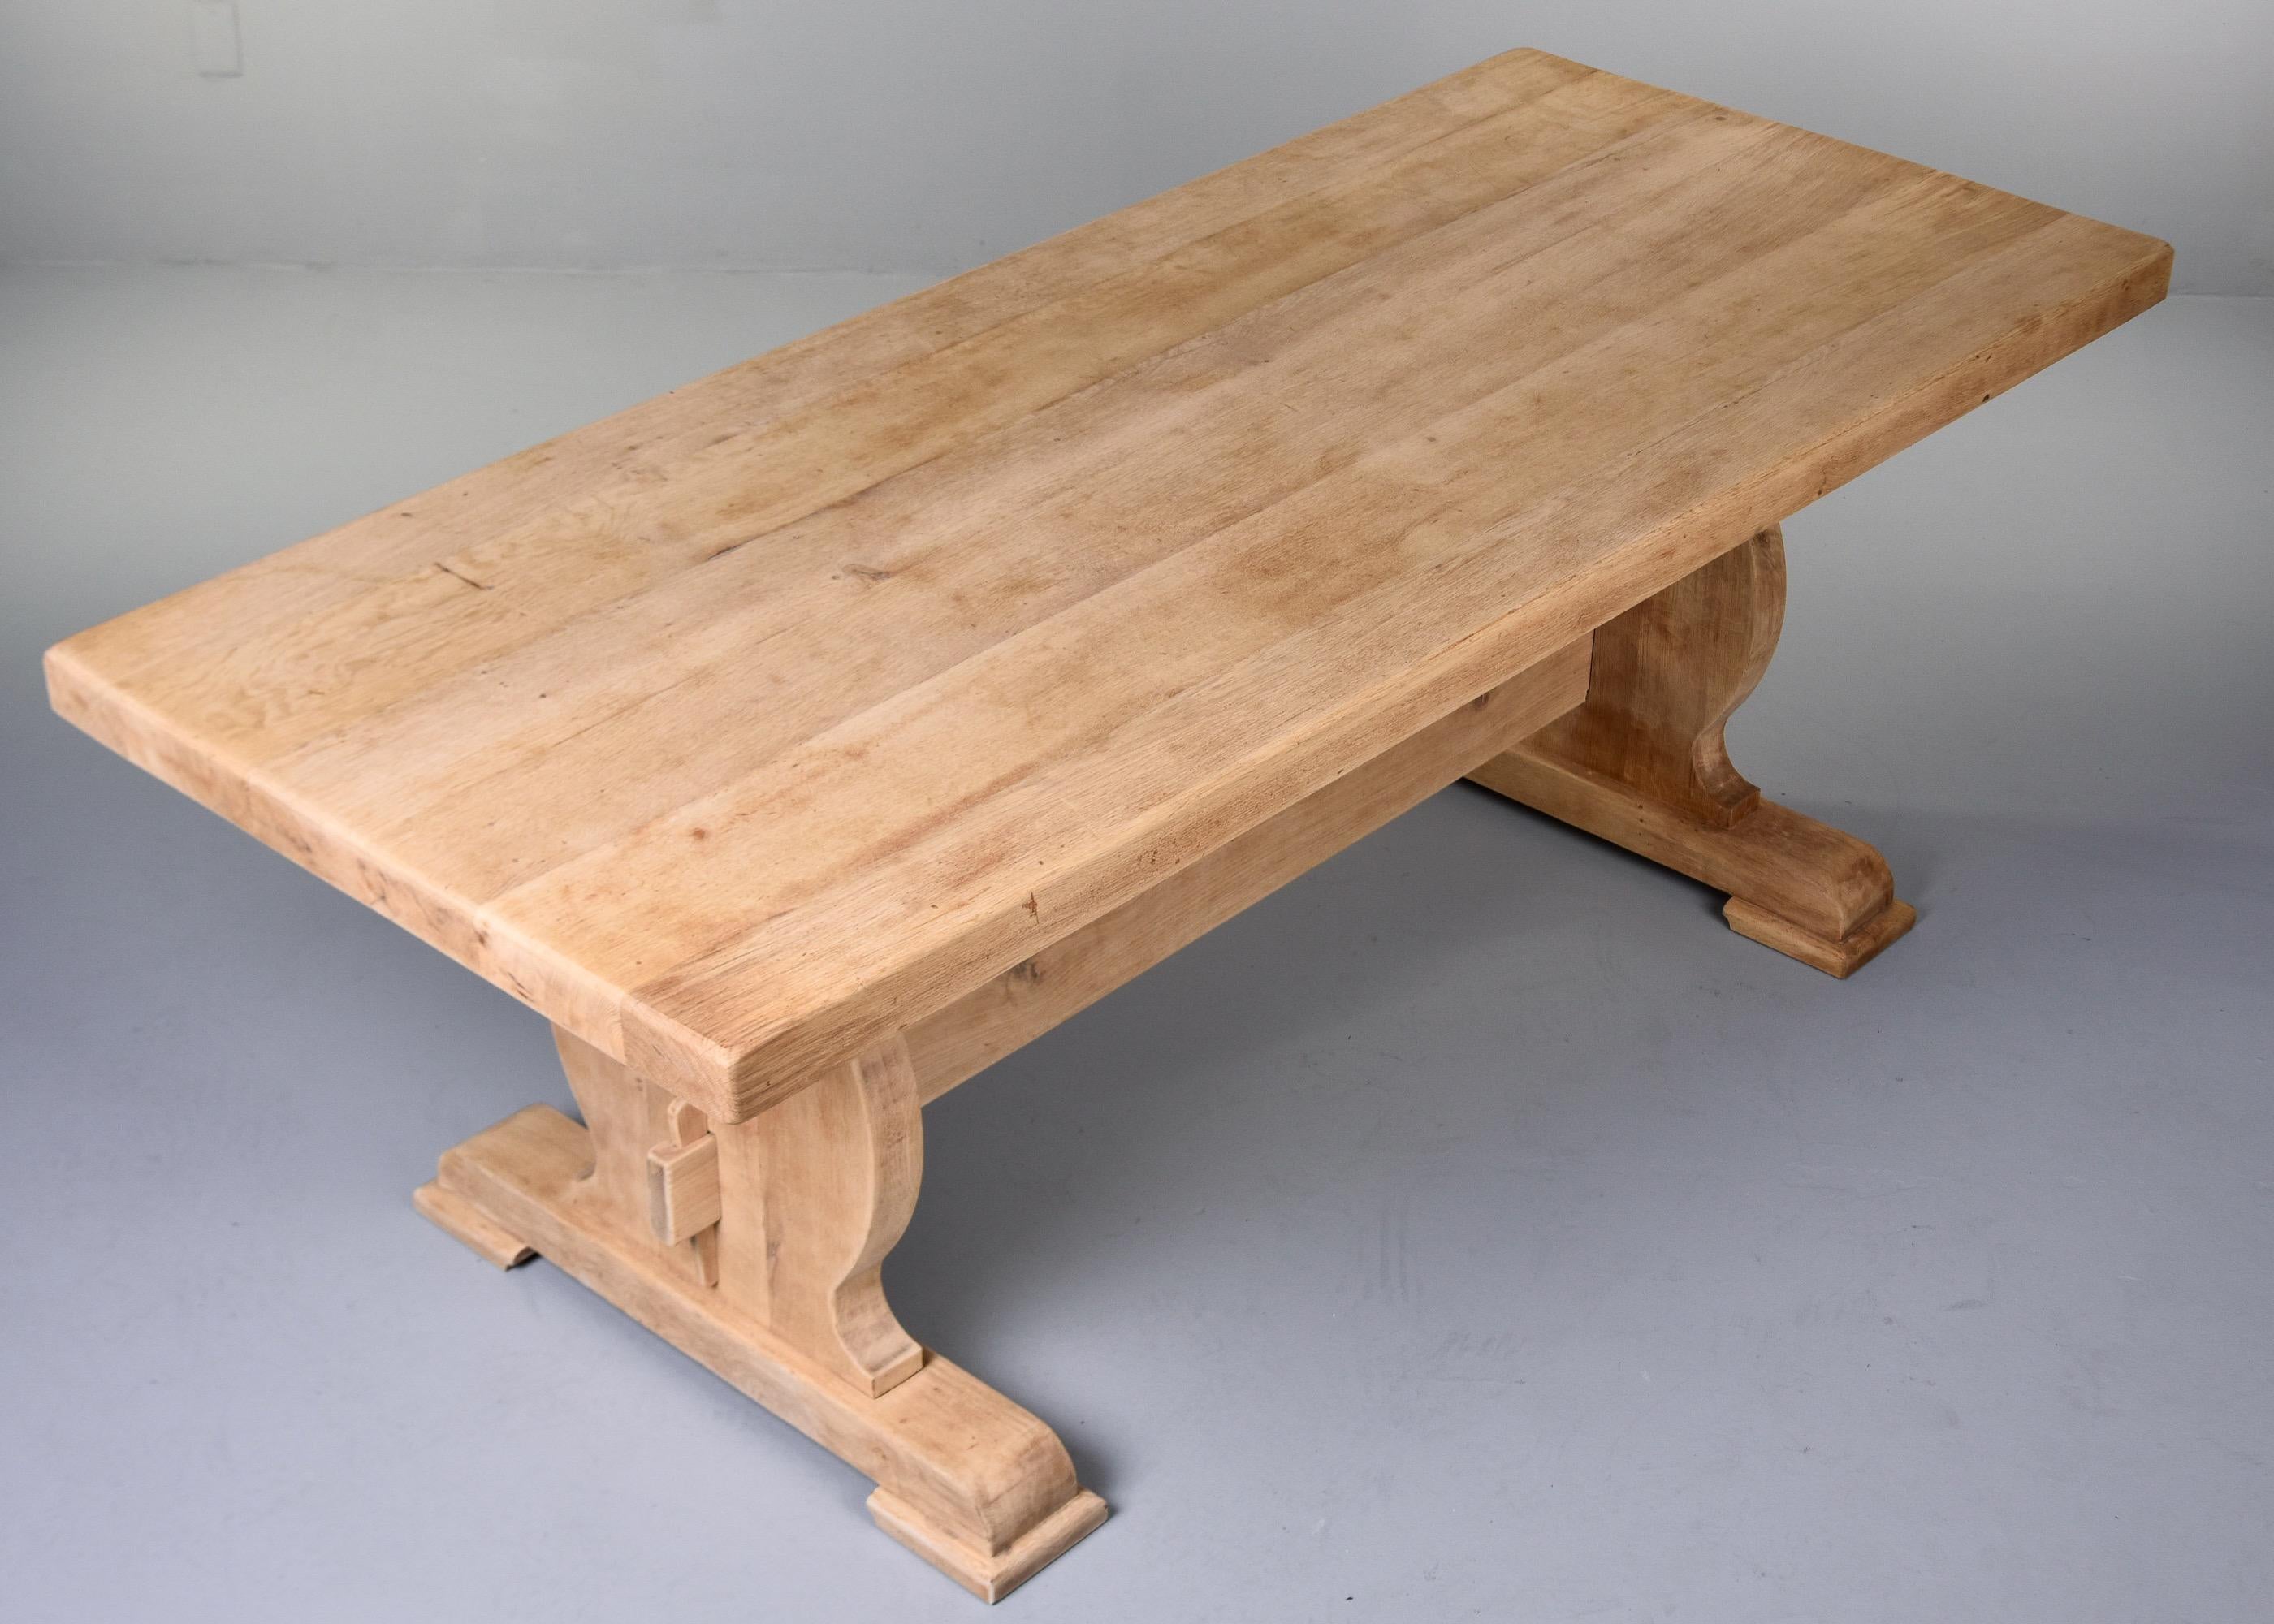 Circa 1900 Sanded Bare Oak French Country Trestle Table 6